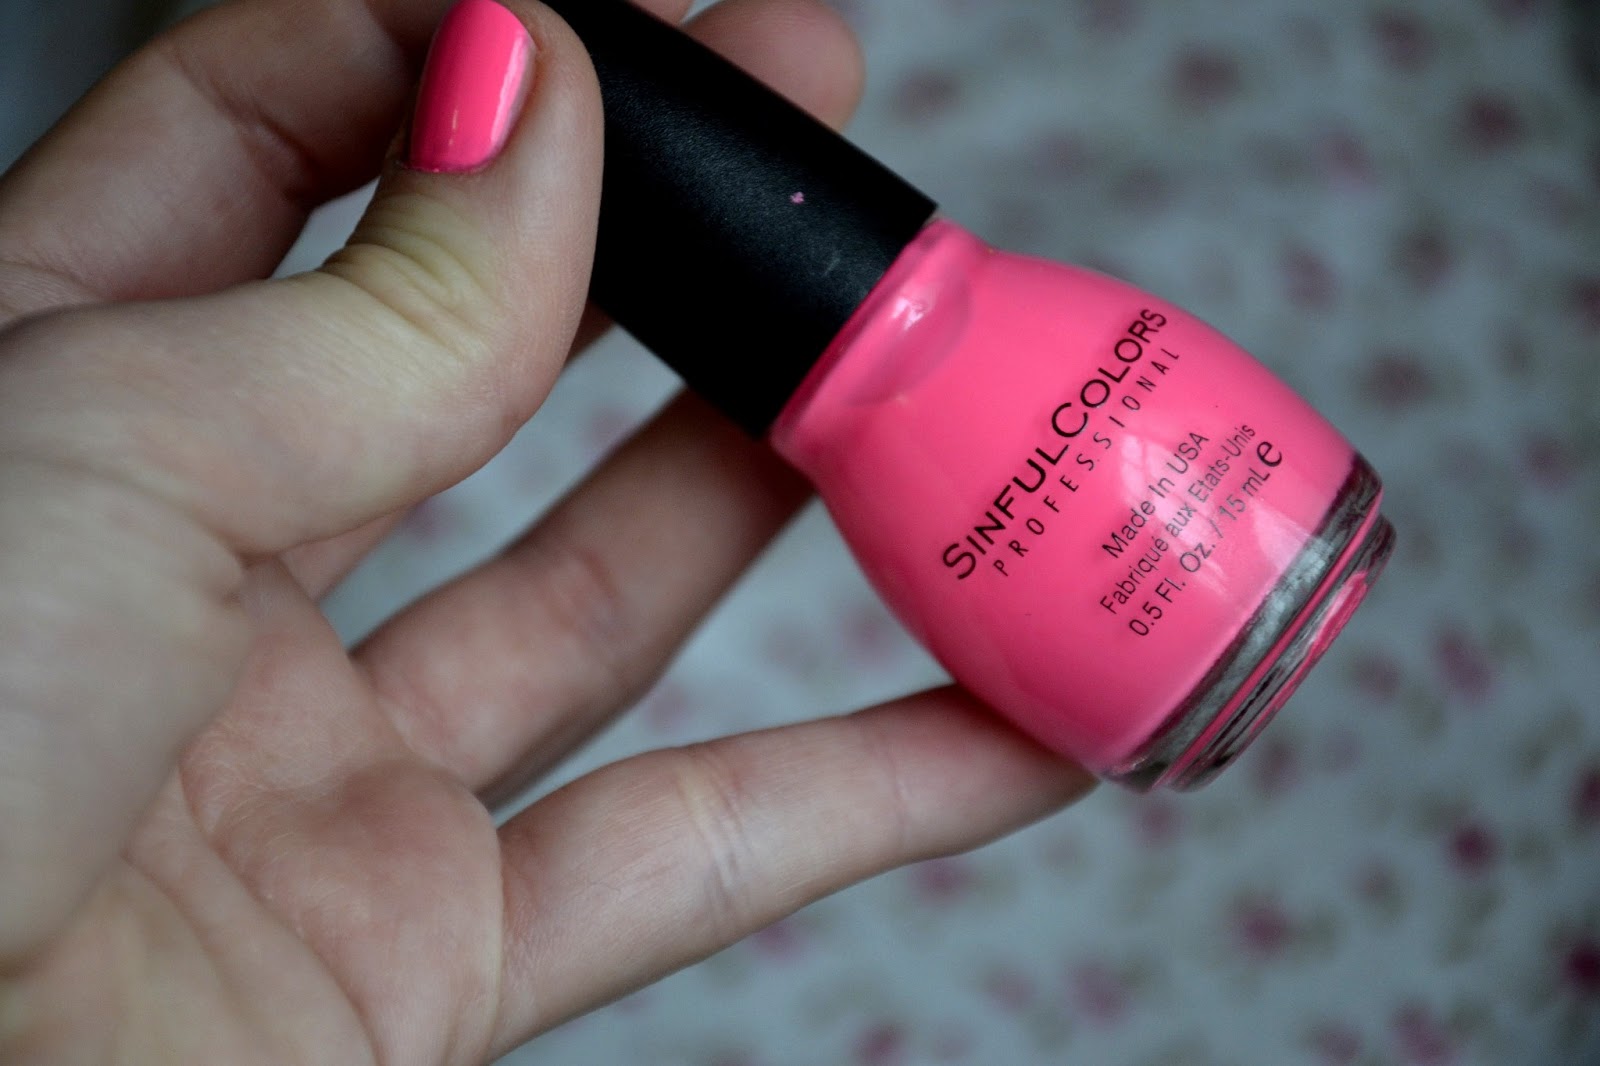 2. Sinful Colors Professional Nail Polish - See You Later - wide 10